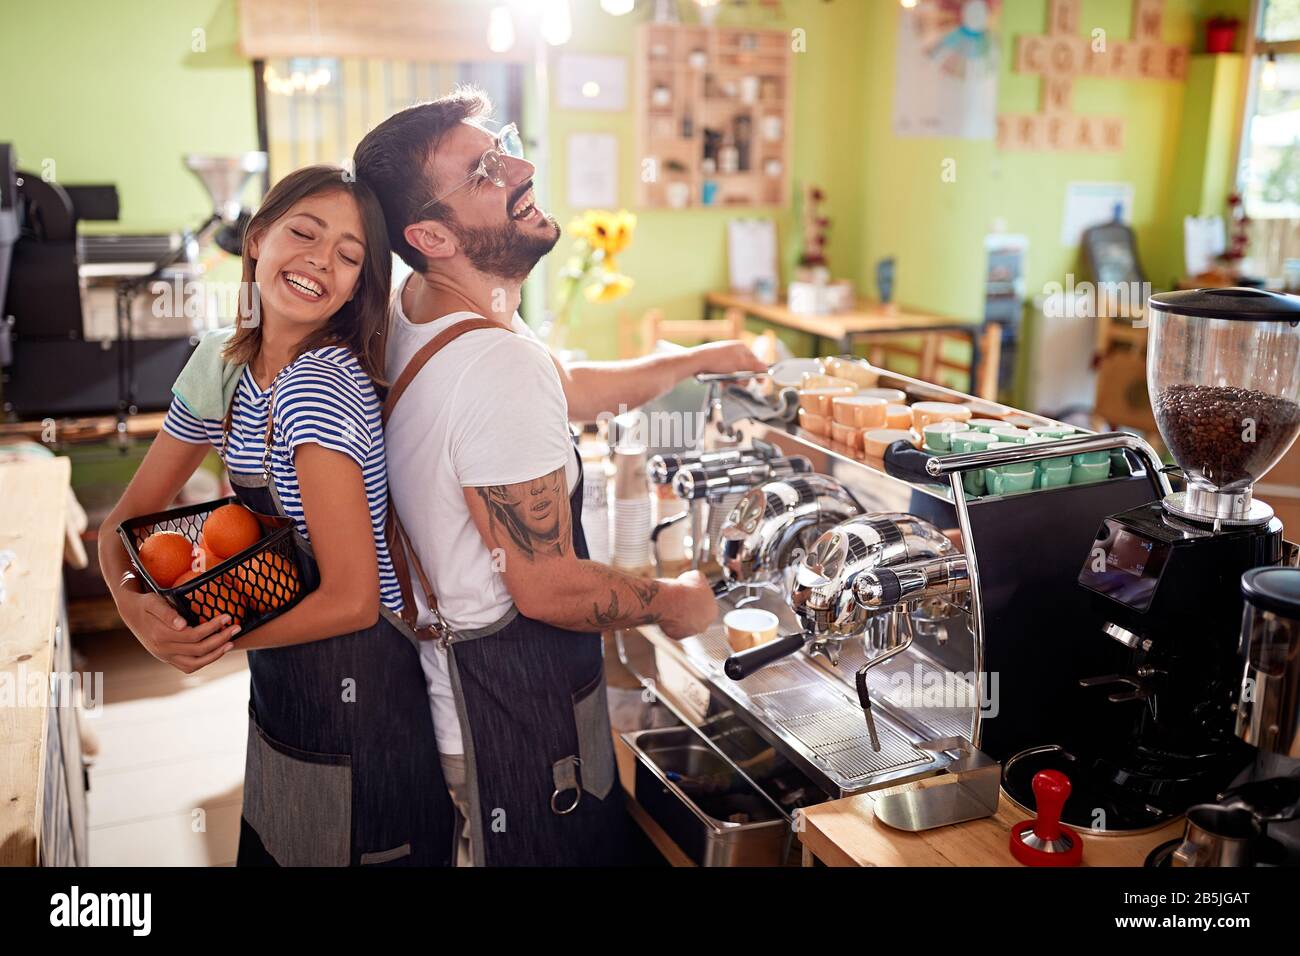 Smiling man and woman waiter in apron at bar or coffee shop Stock Photo